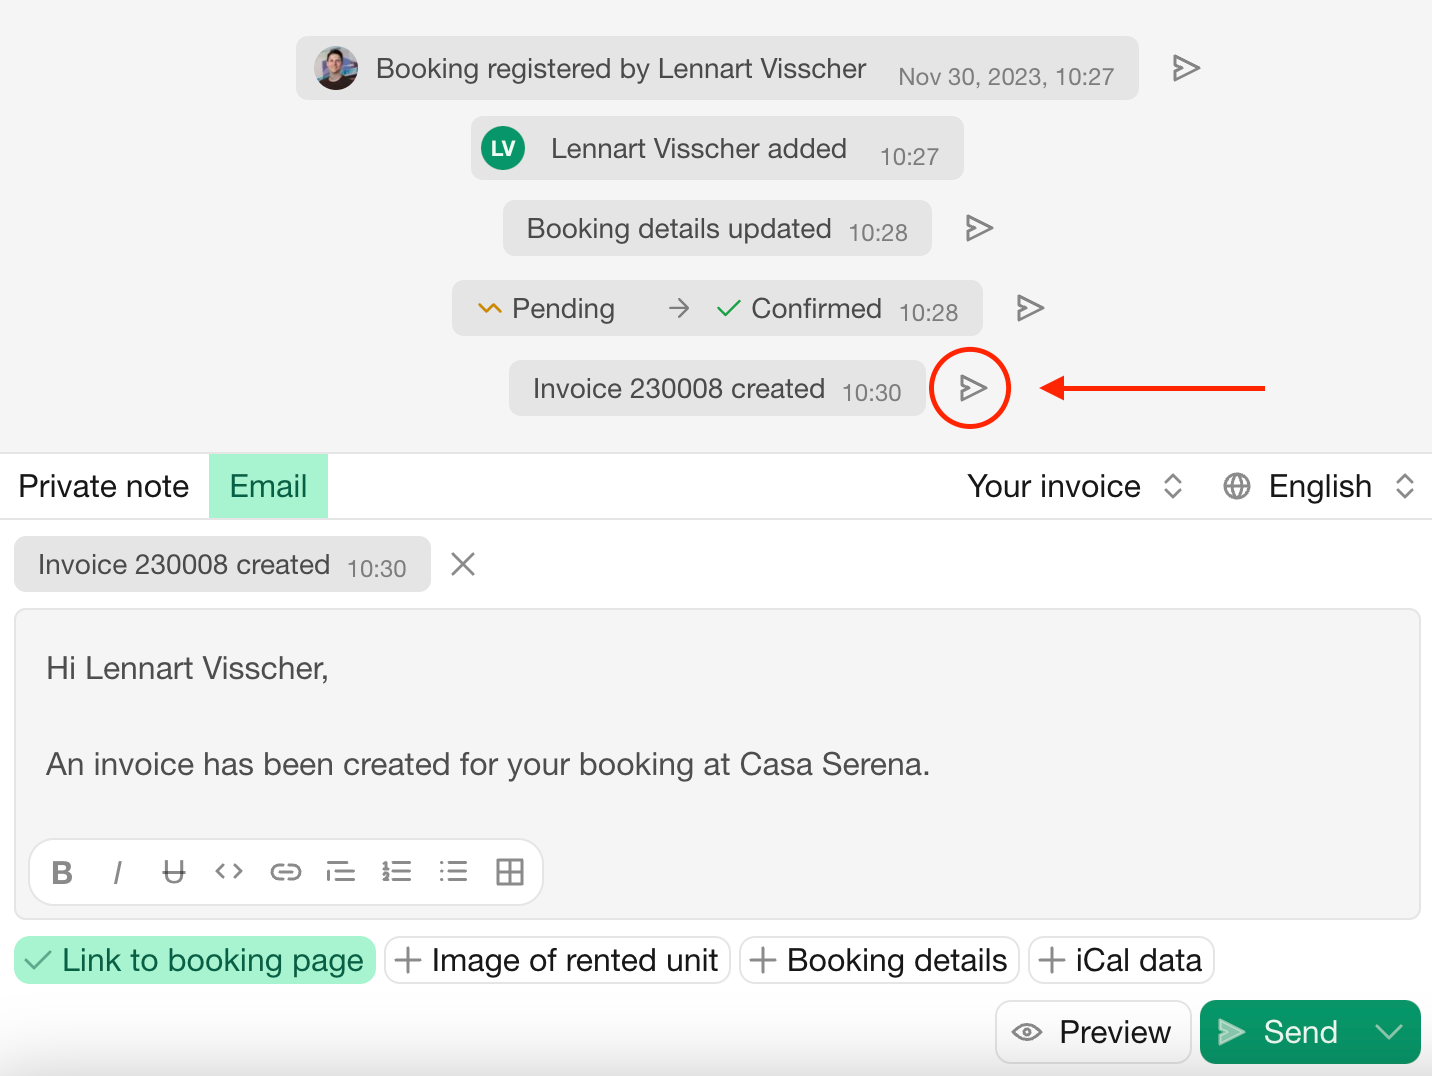 Sending emails related to an invoice in Bookingmood